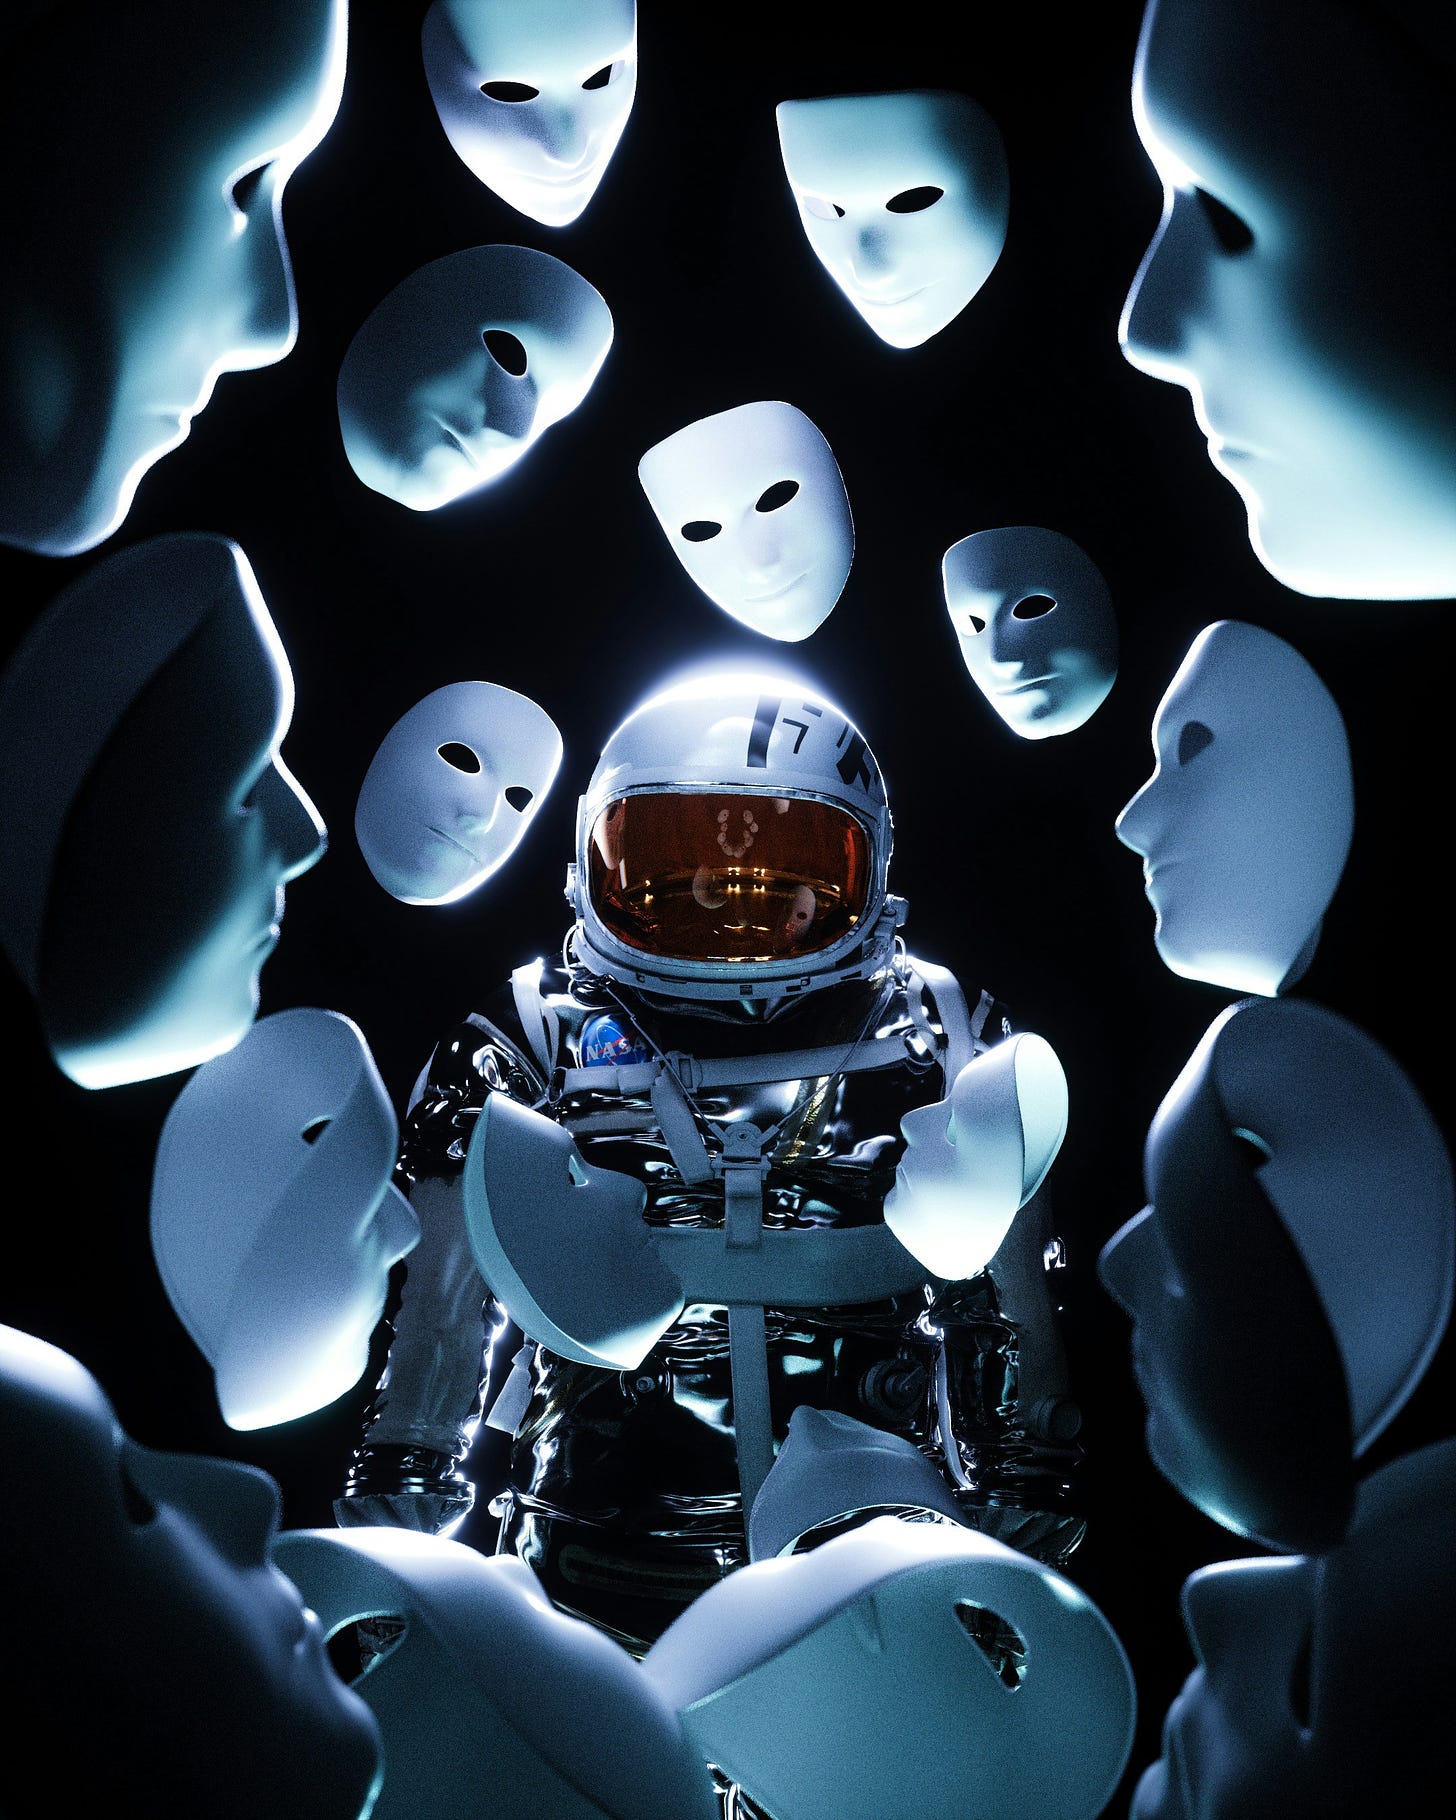 A 3D render of an astronaut against a black background, surrounded by floating expressionless white masks